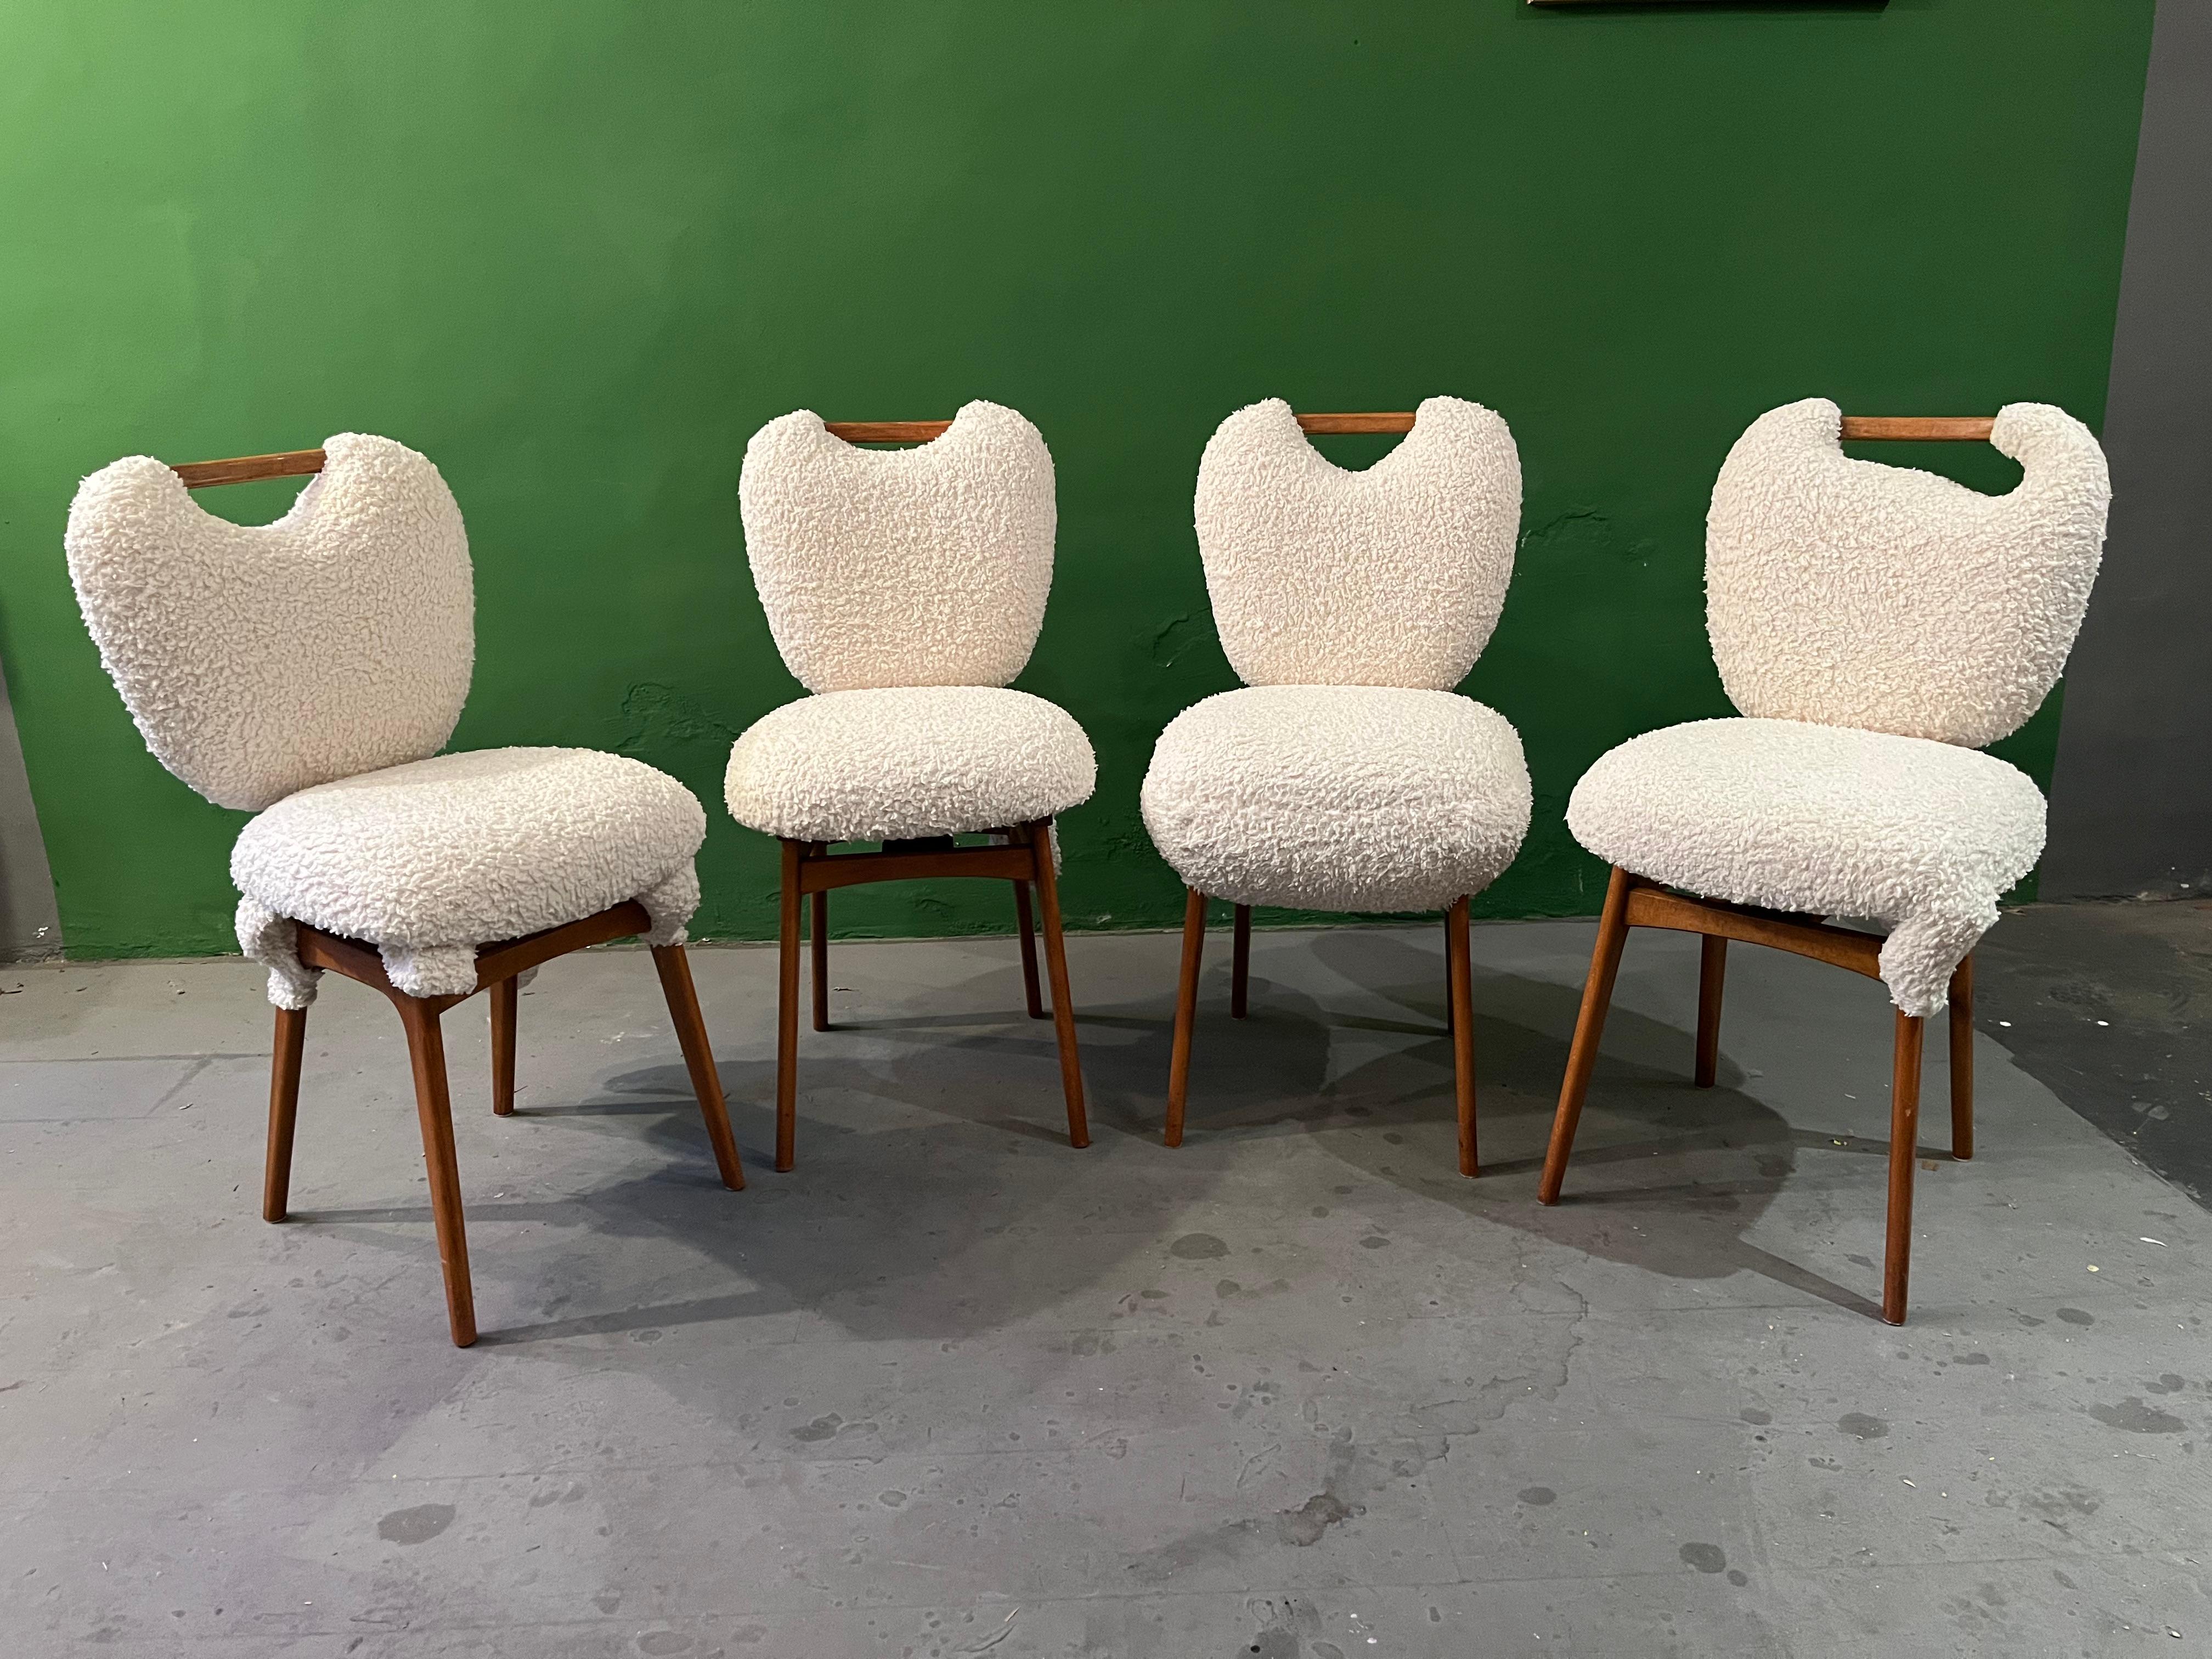 Teddy Chairs by Markus Friedrich Staab/ Contemporized For Sale 6